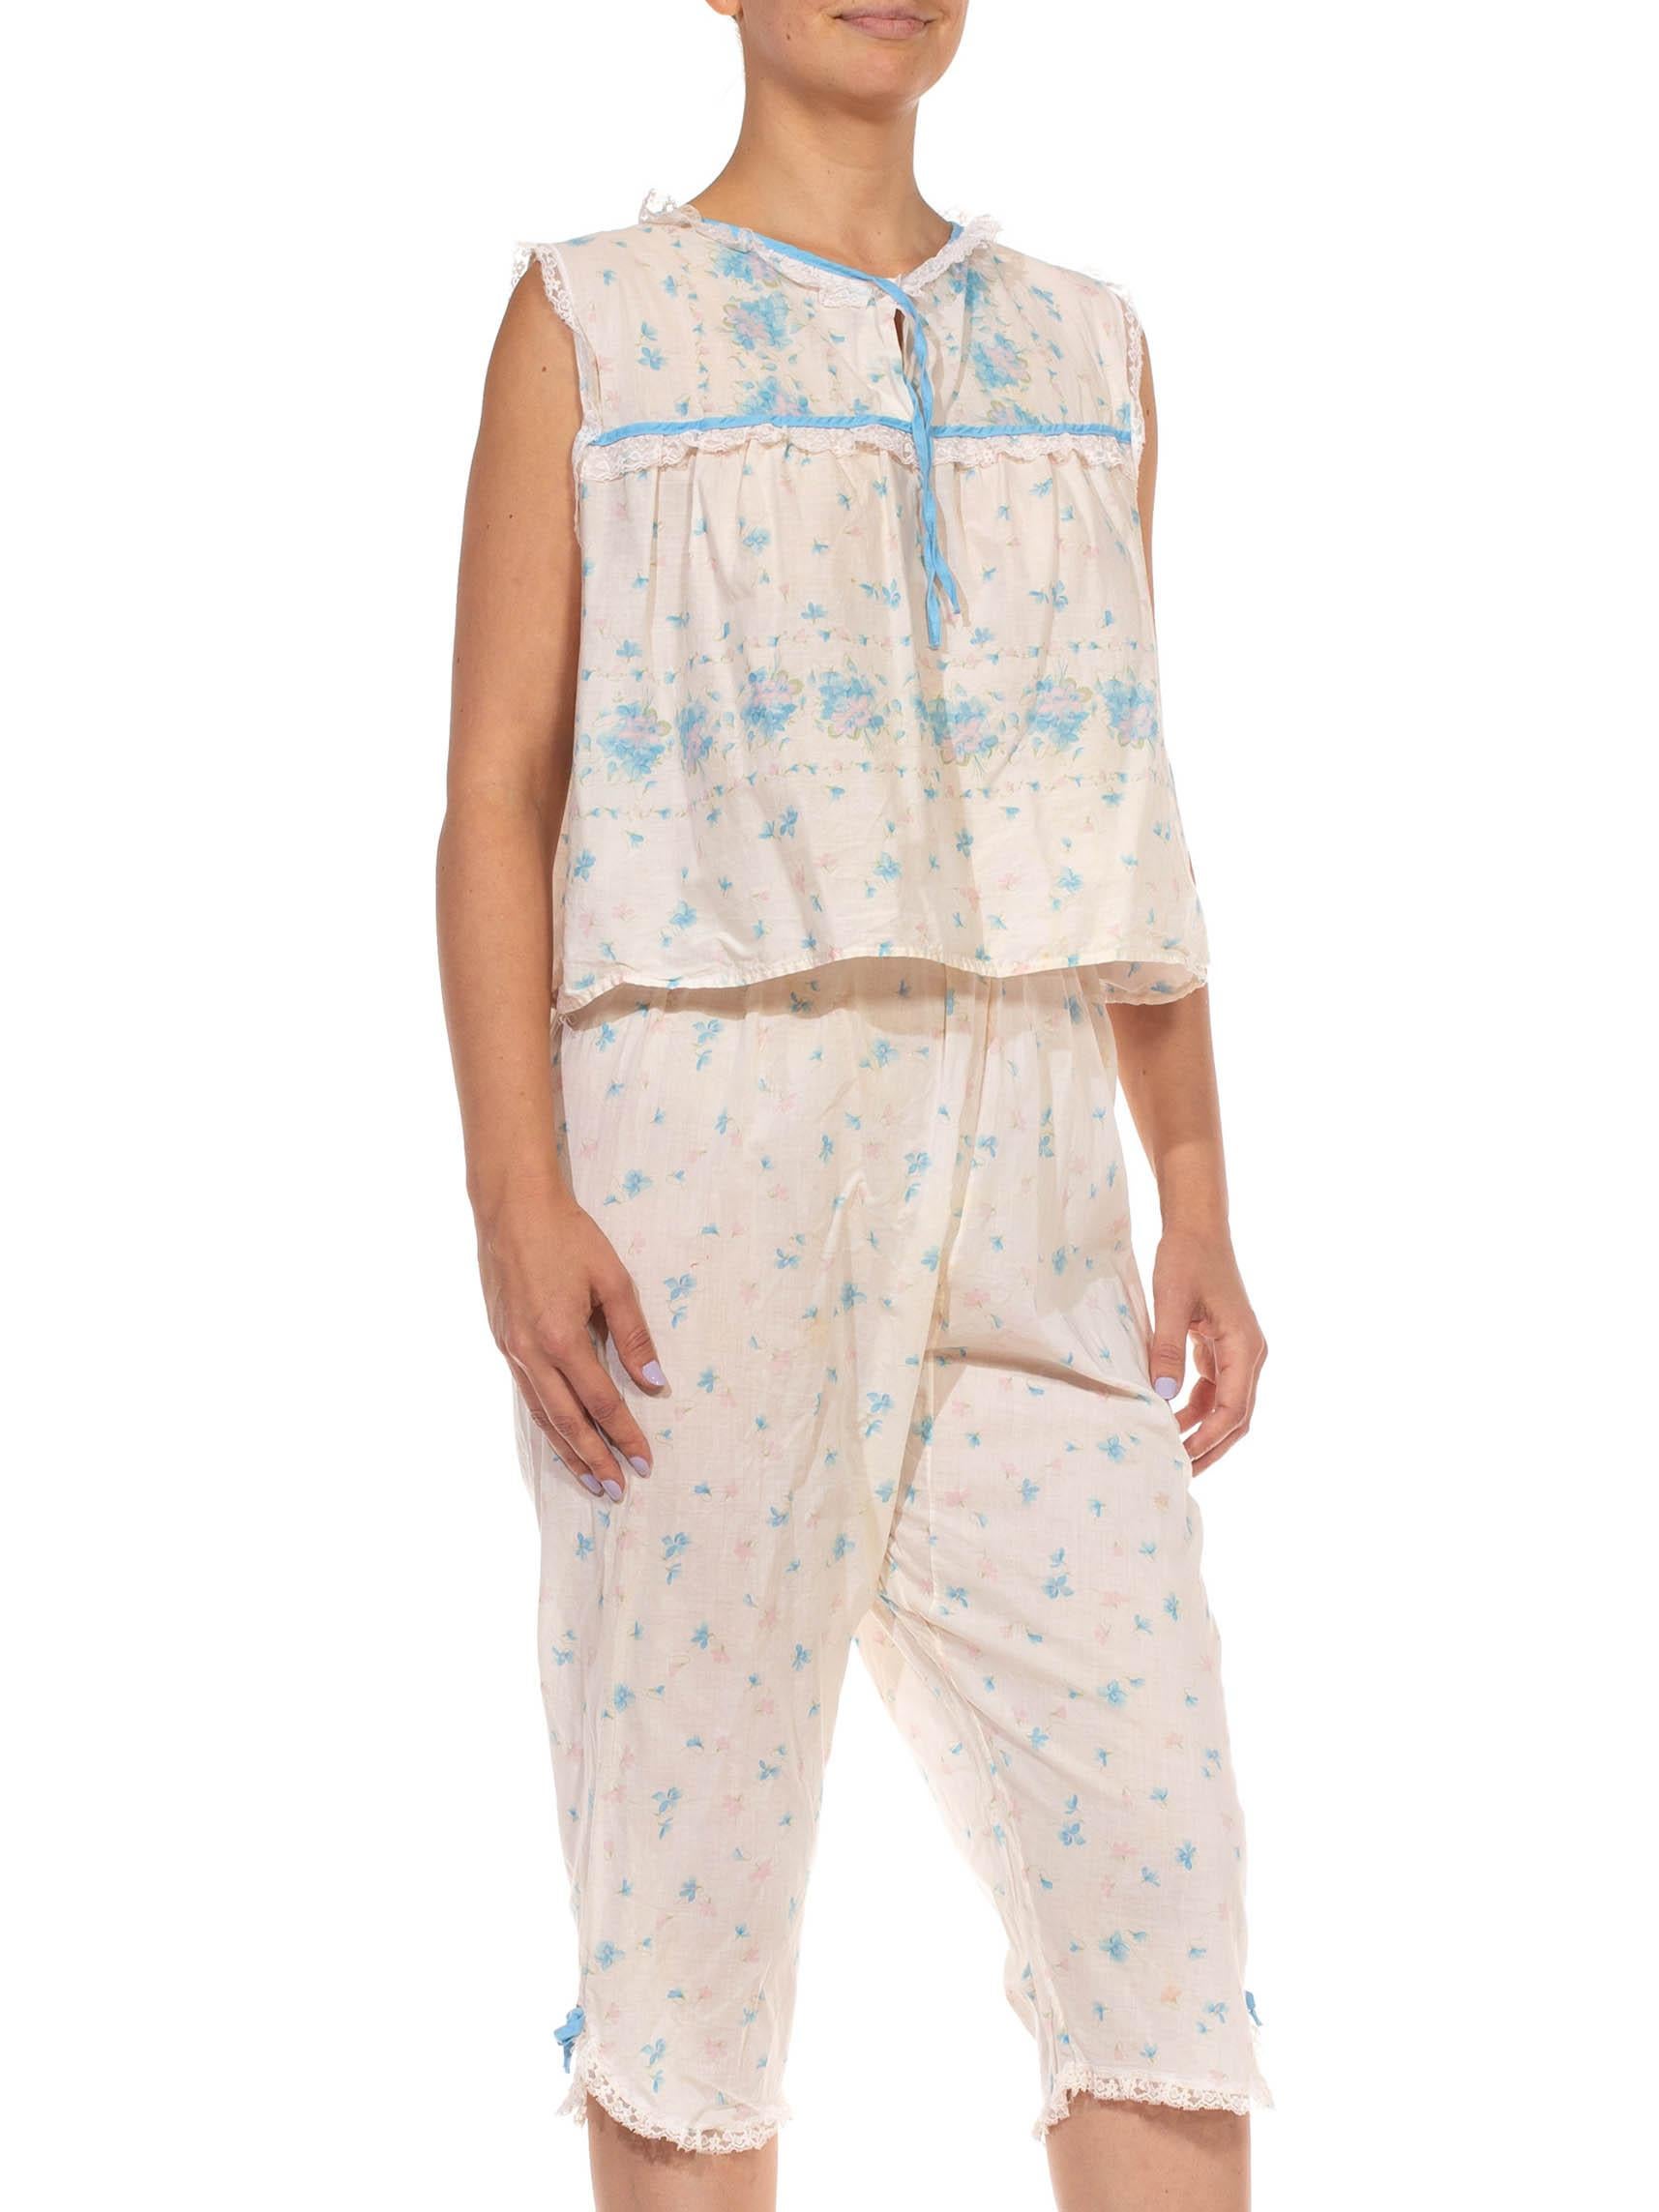 blue and white floral pajamas